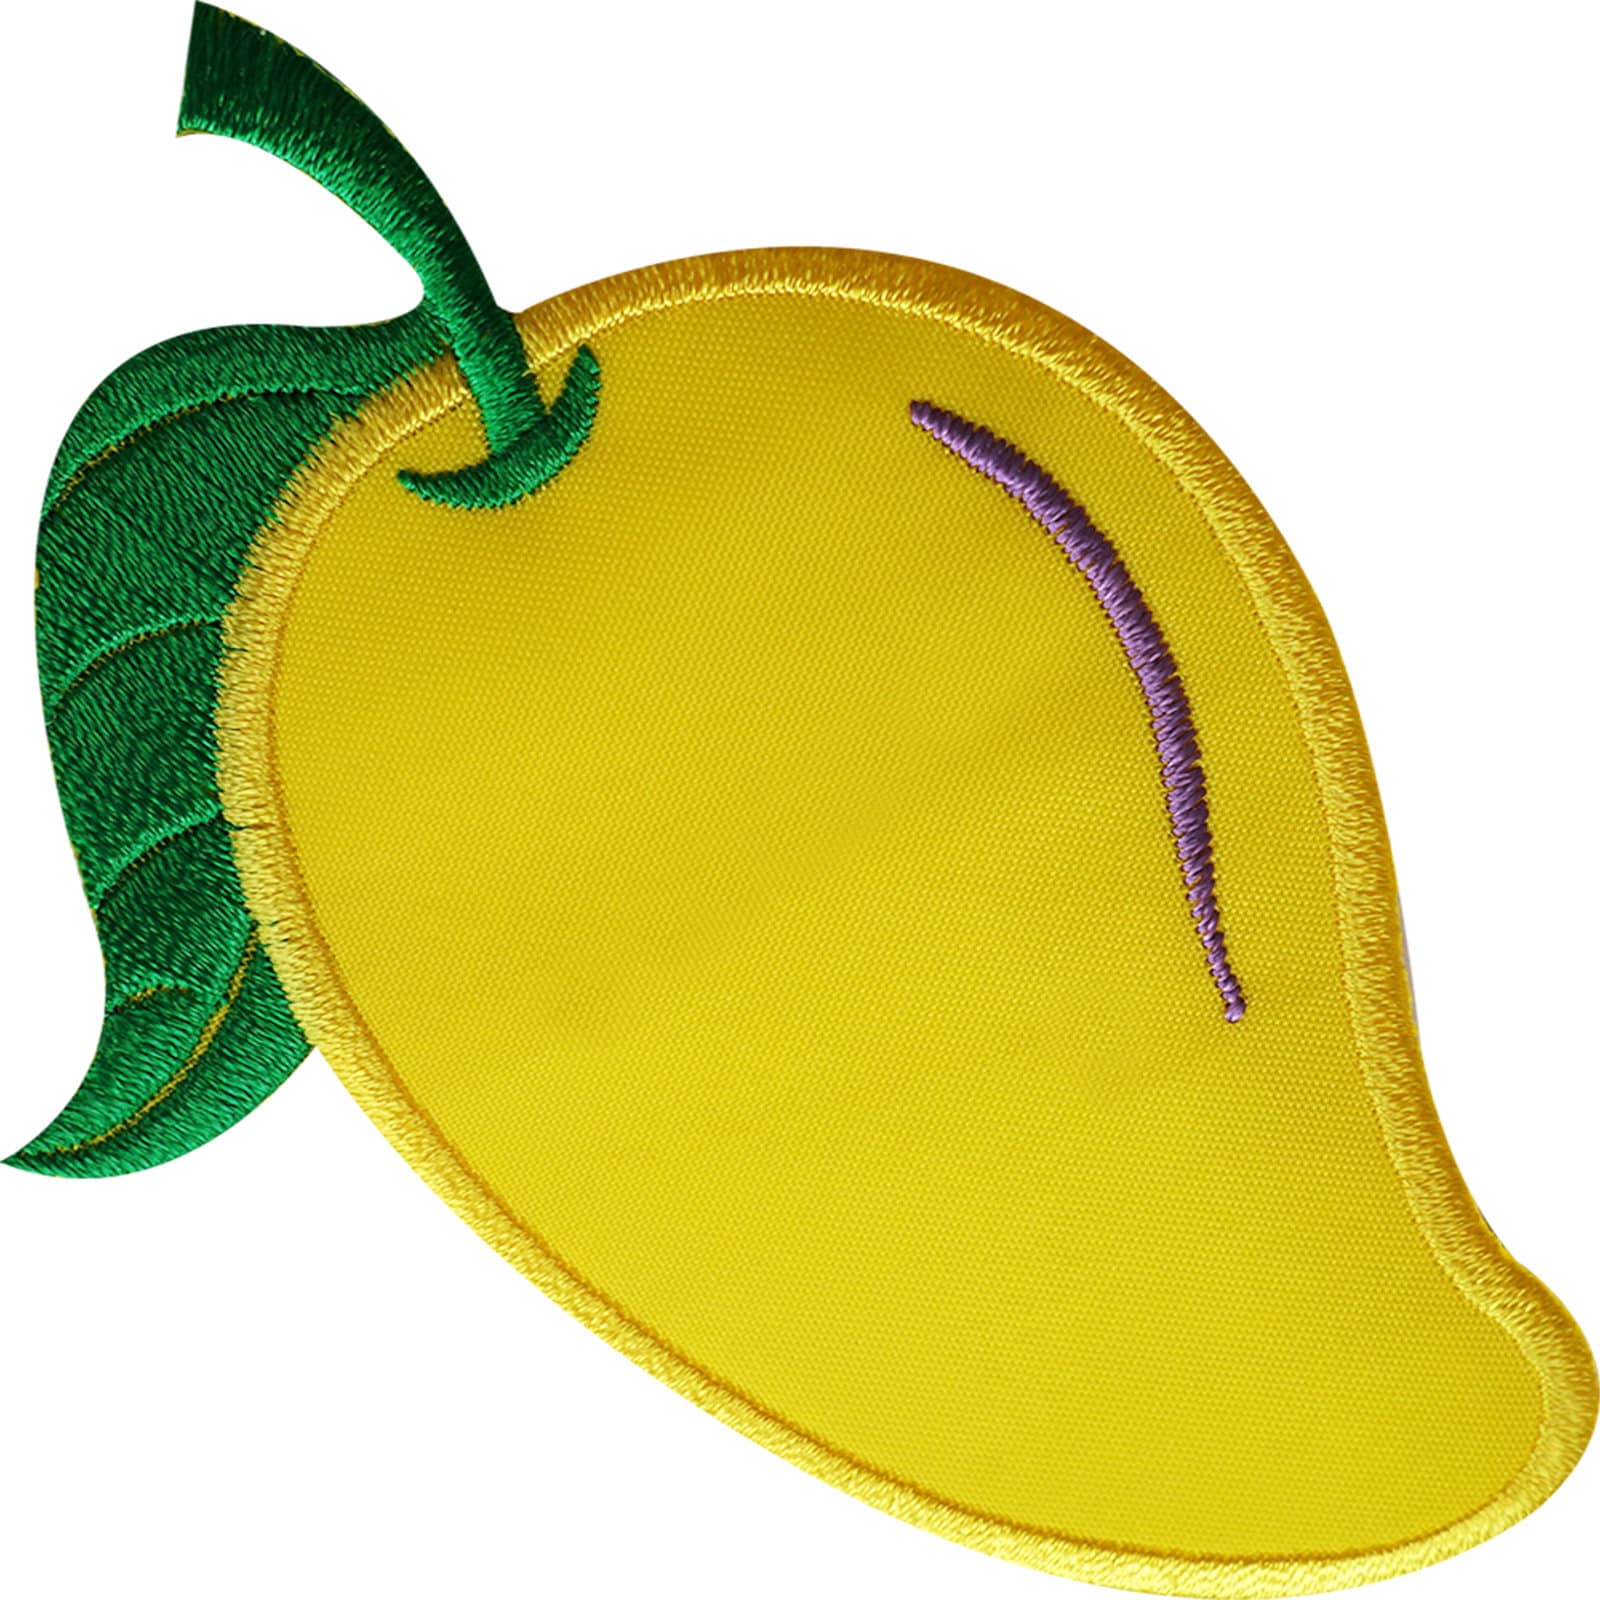 Mango Patch Embroidered Iron Sew On Cloth Fruit Badge Embroidery Crafts Applique 